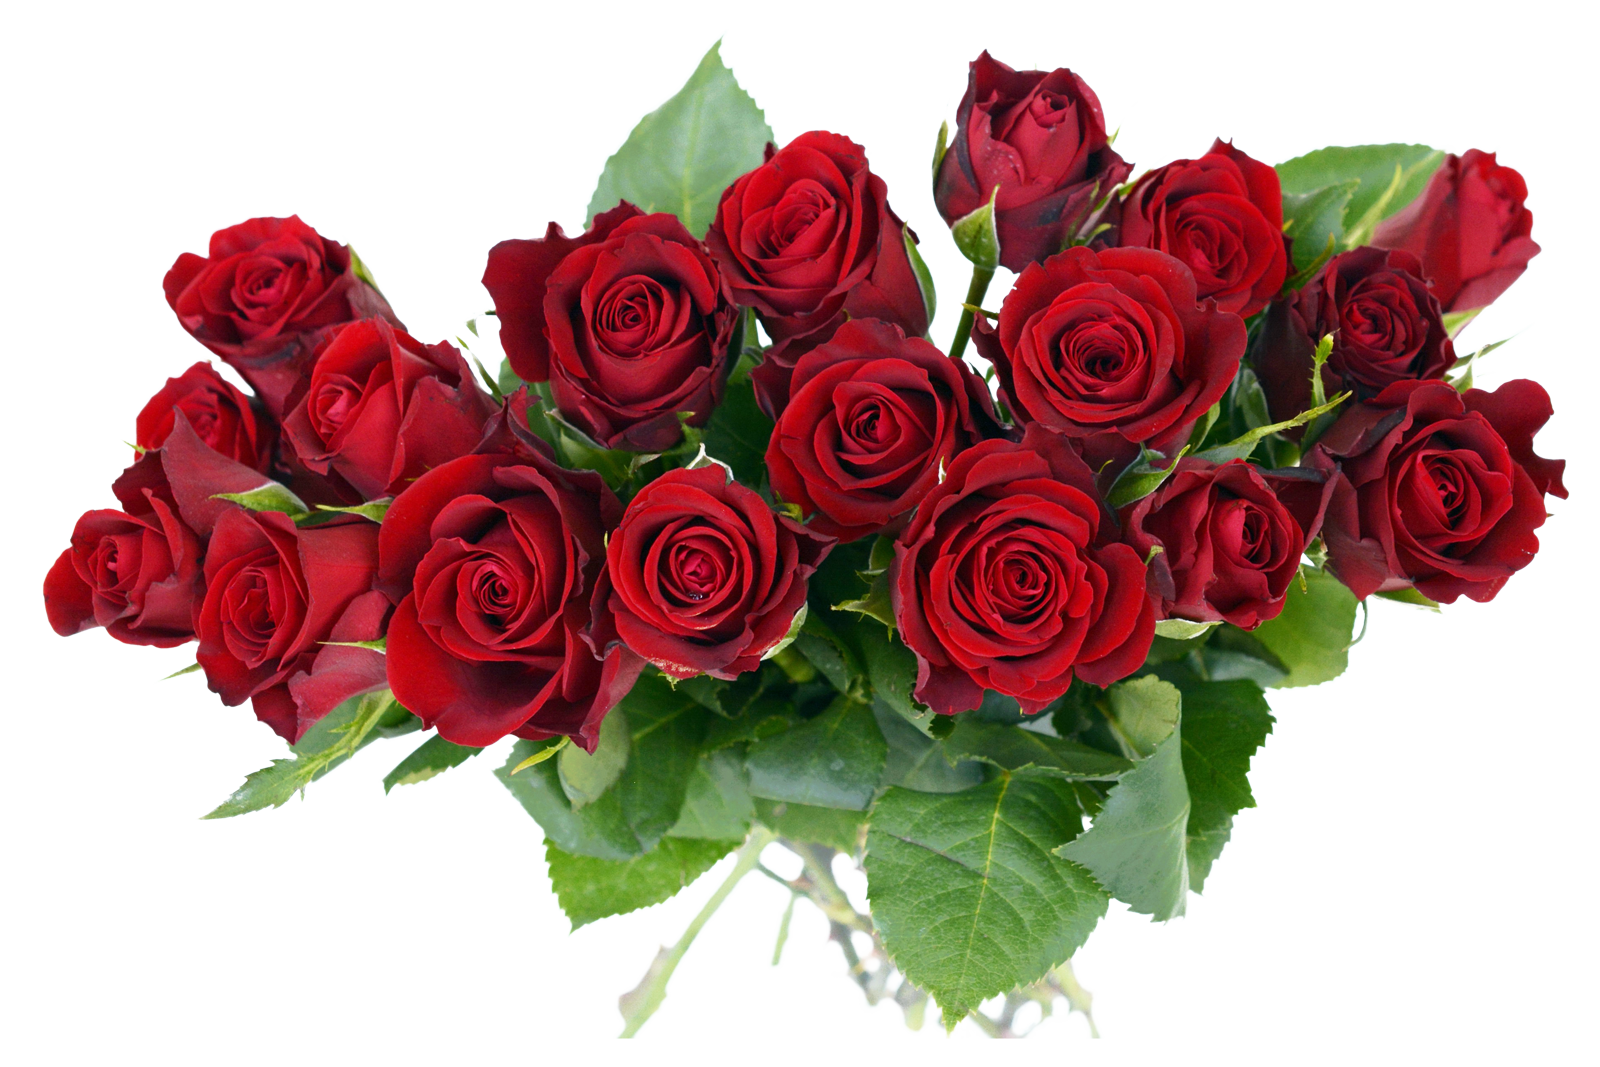 red roses bouquet png image hd download #40638